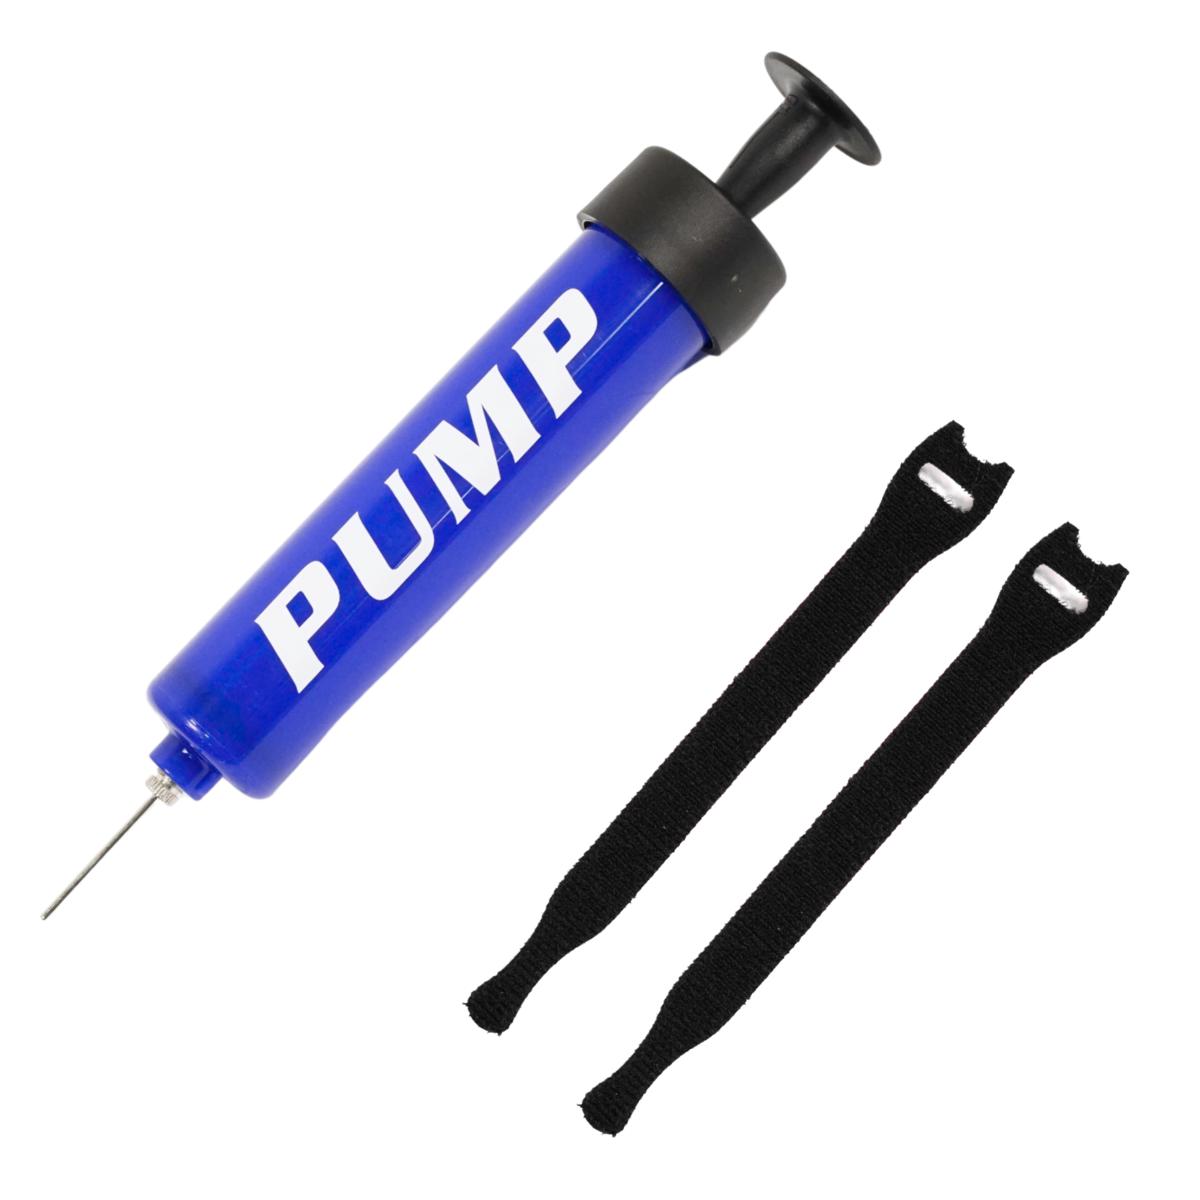 Blue-9 Propel Pump And Hook And Loop Straps